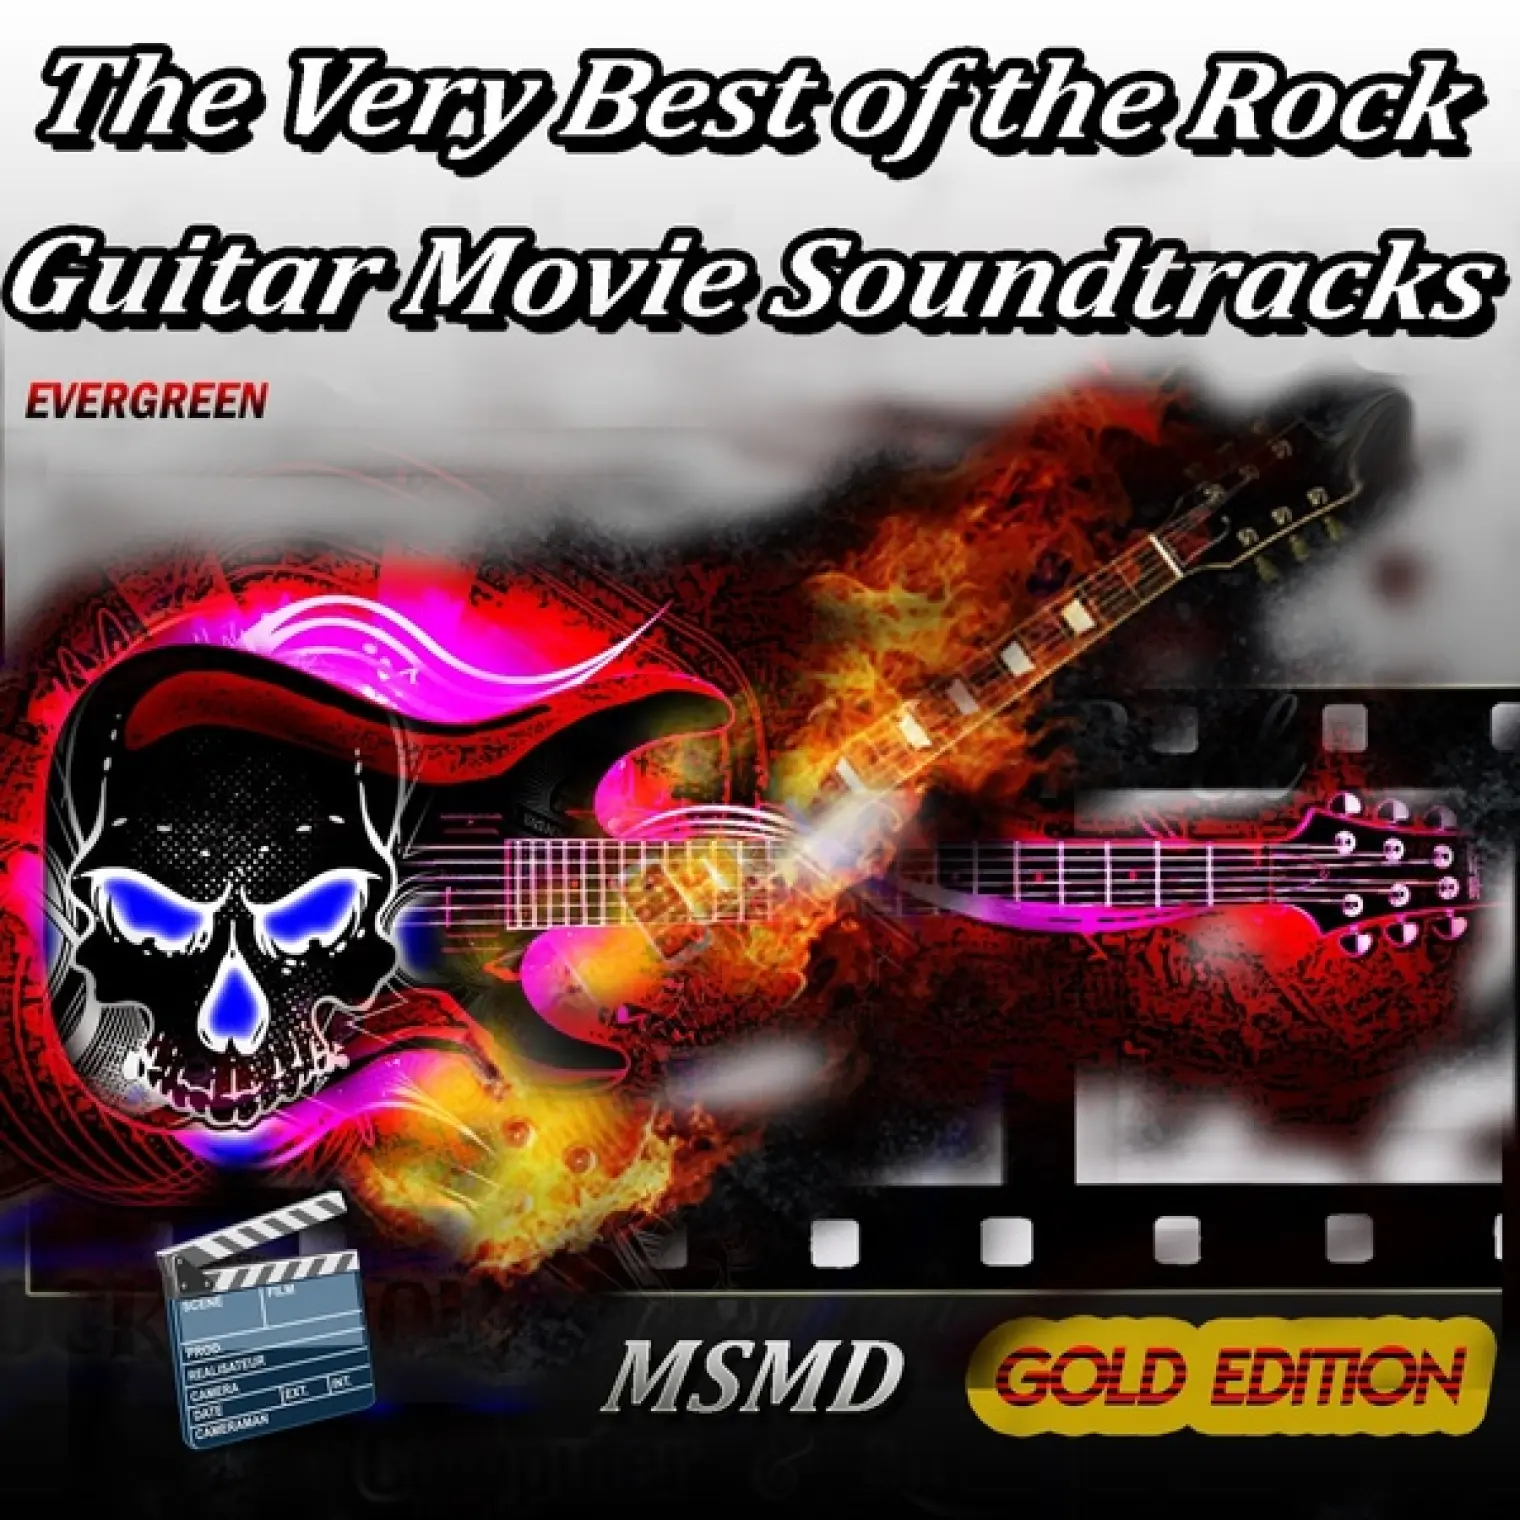 The Very Best of the Rock Guitar Movie Soundtracks (Evergreen Gold Edition) -  Msmd 